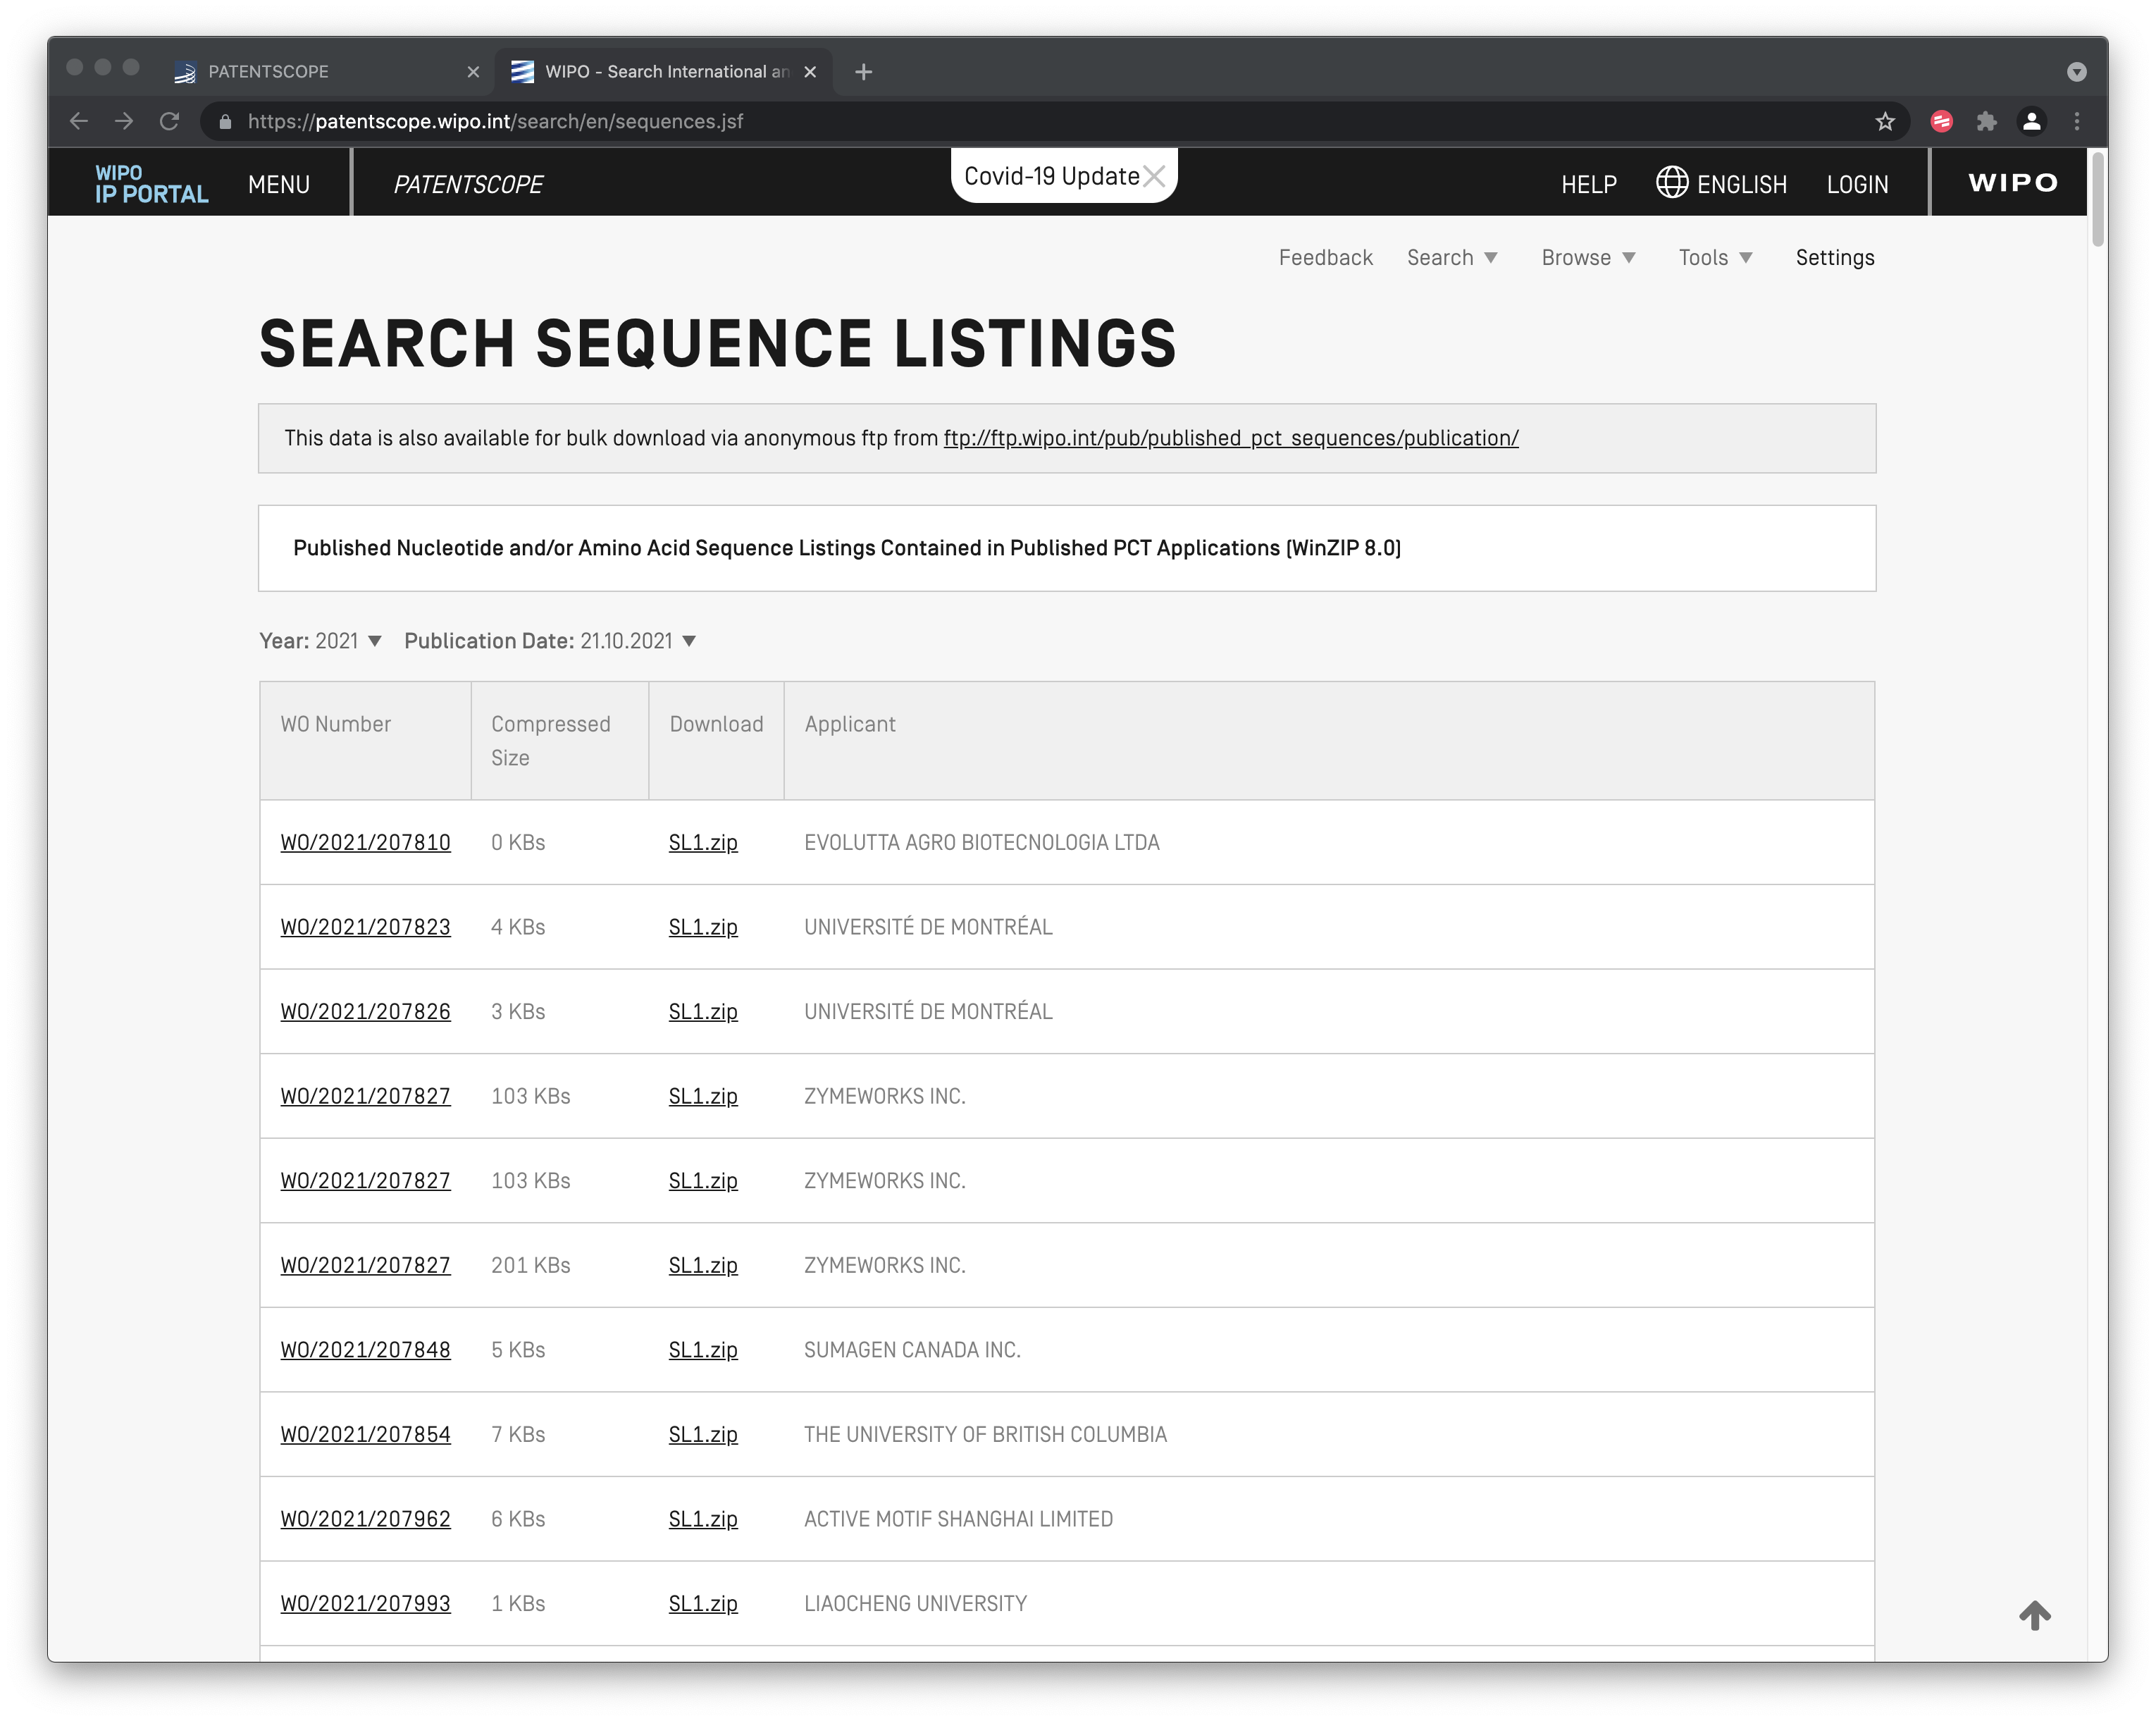 Patentscope Sequence Listings with Bulk Download available over ftp